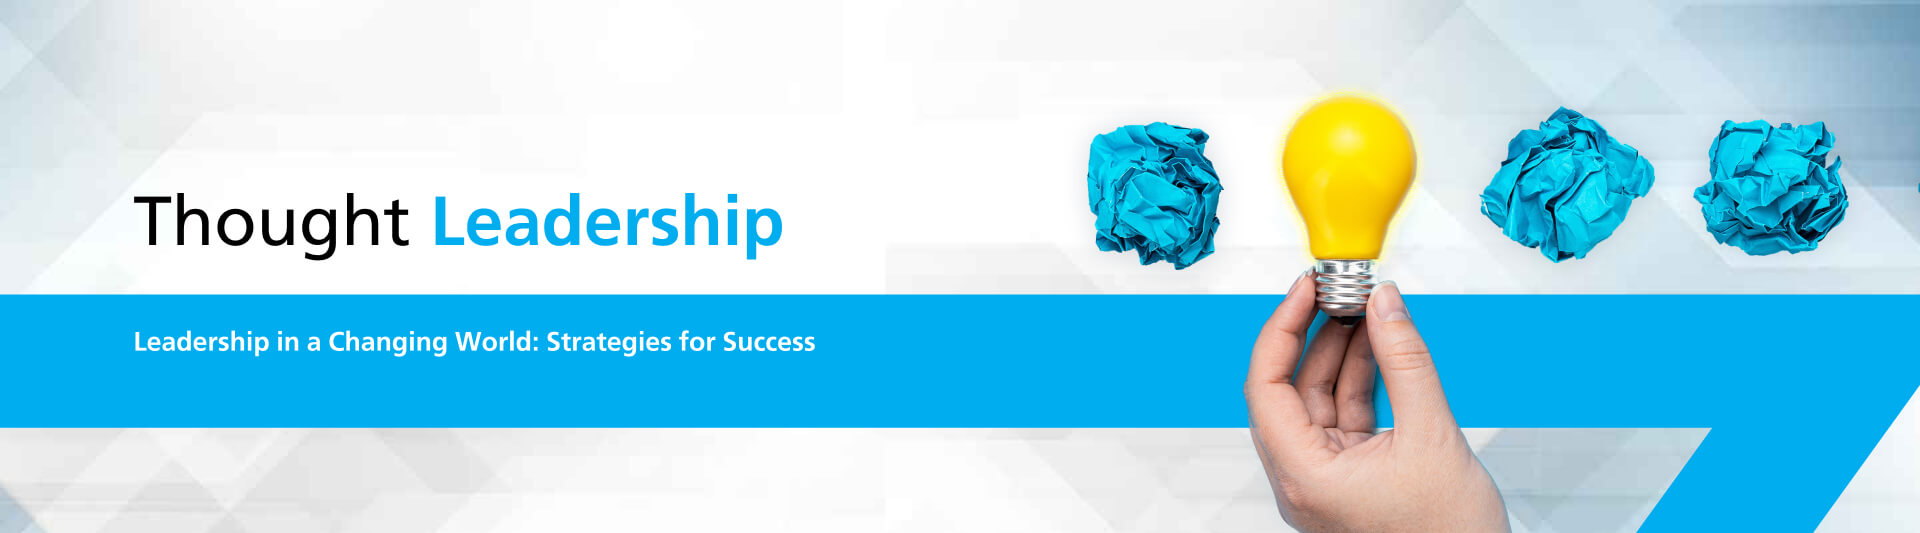 Thought Leadership Banner